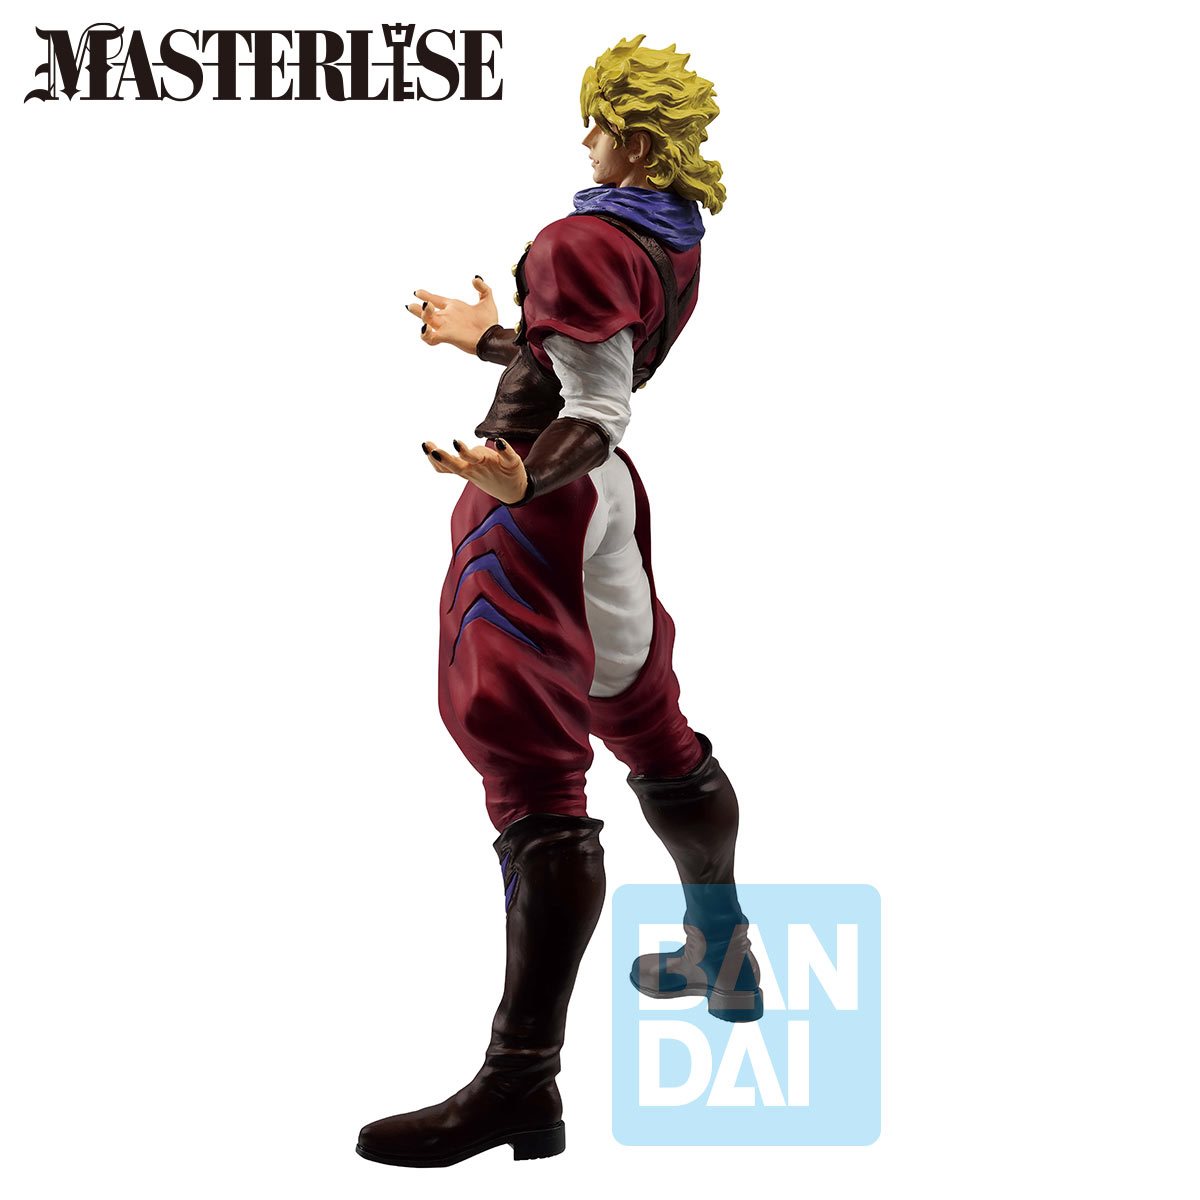 This figure features Dio Brando from the Masterlise series presented by Ichiban Kuji. The figure features the iconic Dio pose with arms spread, palms open and stiff.